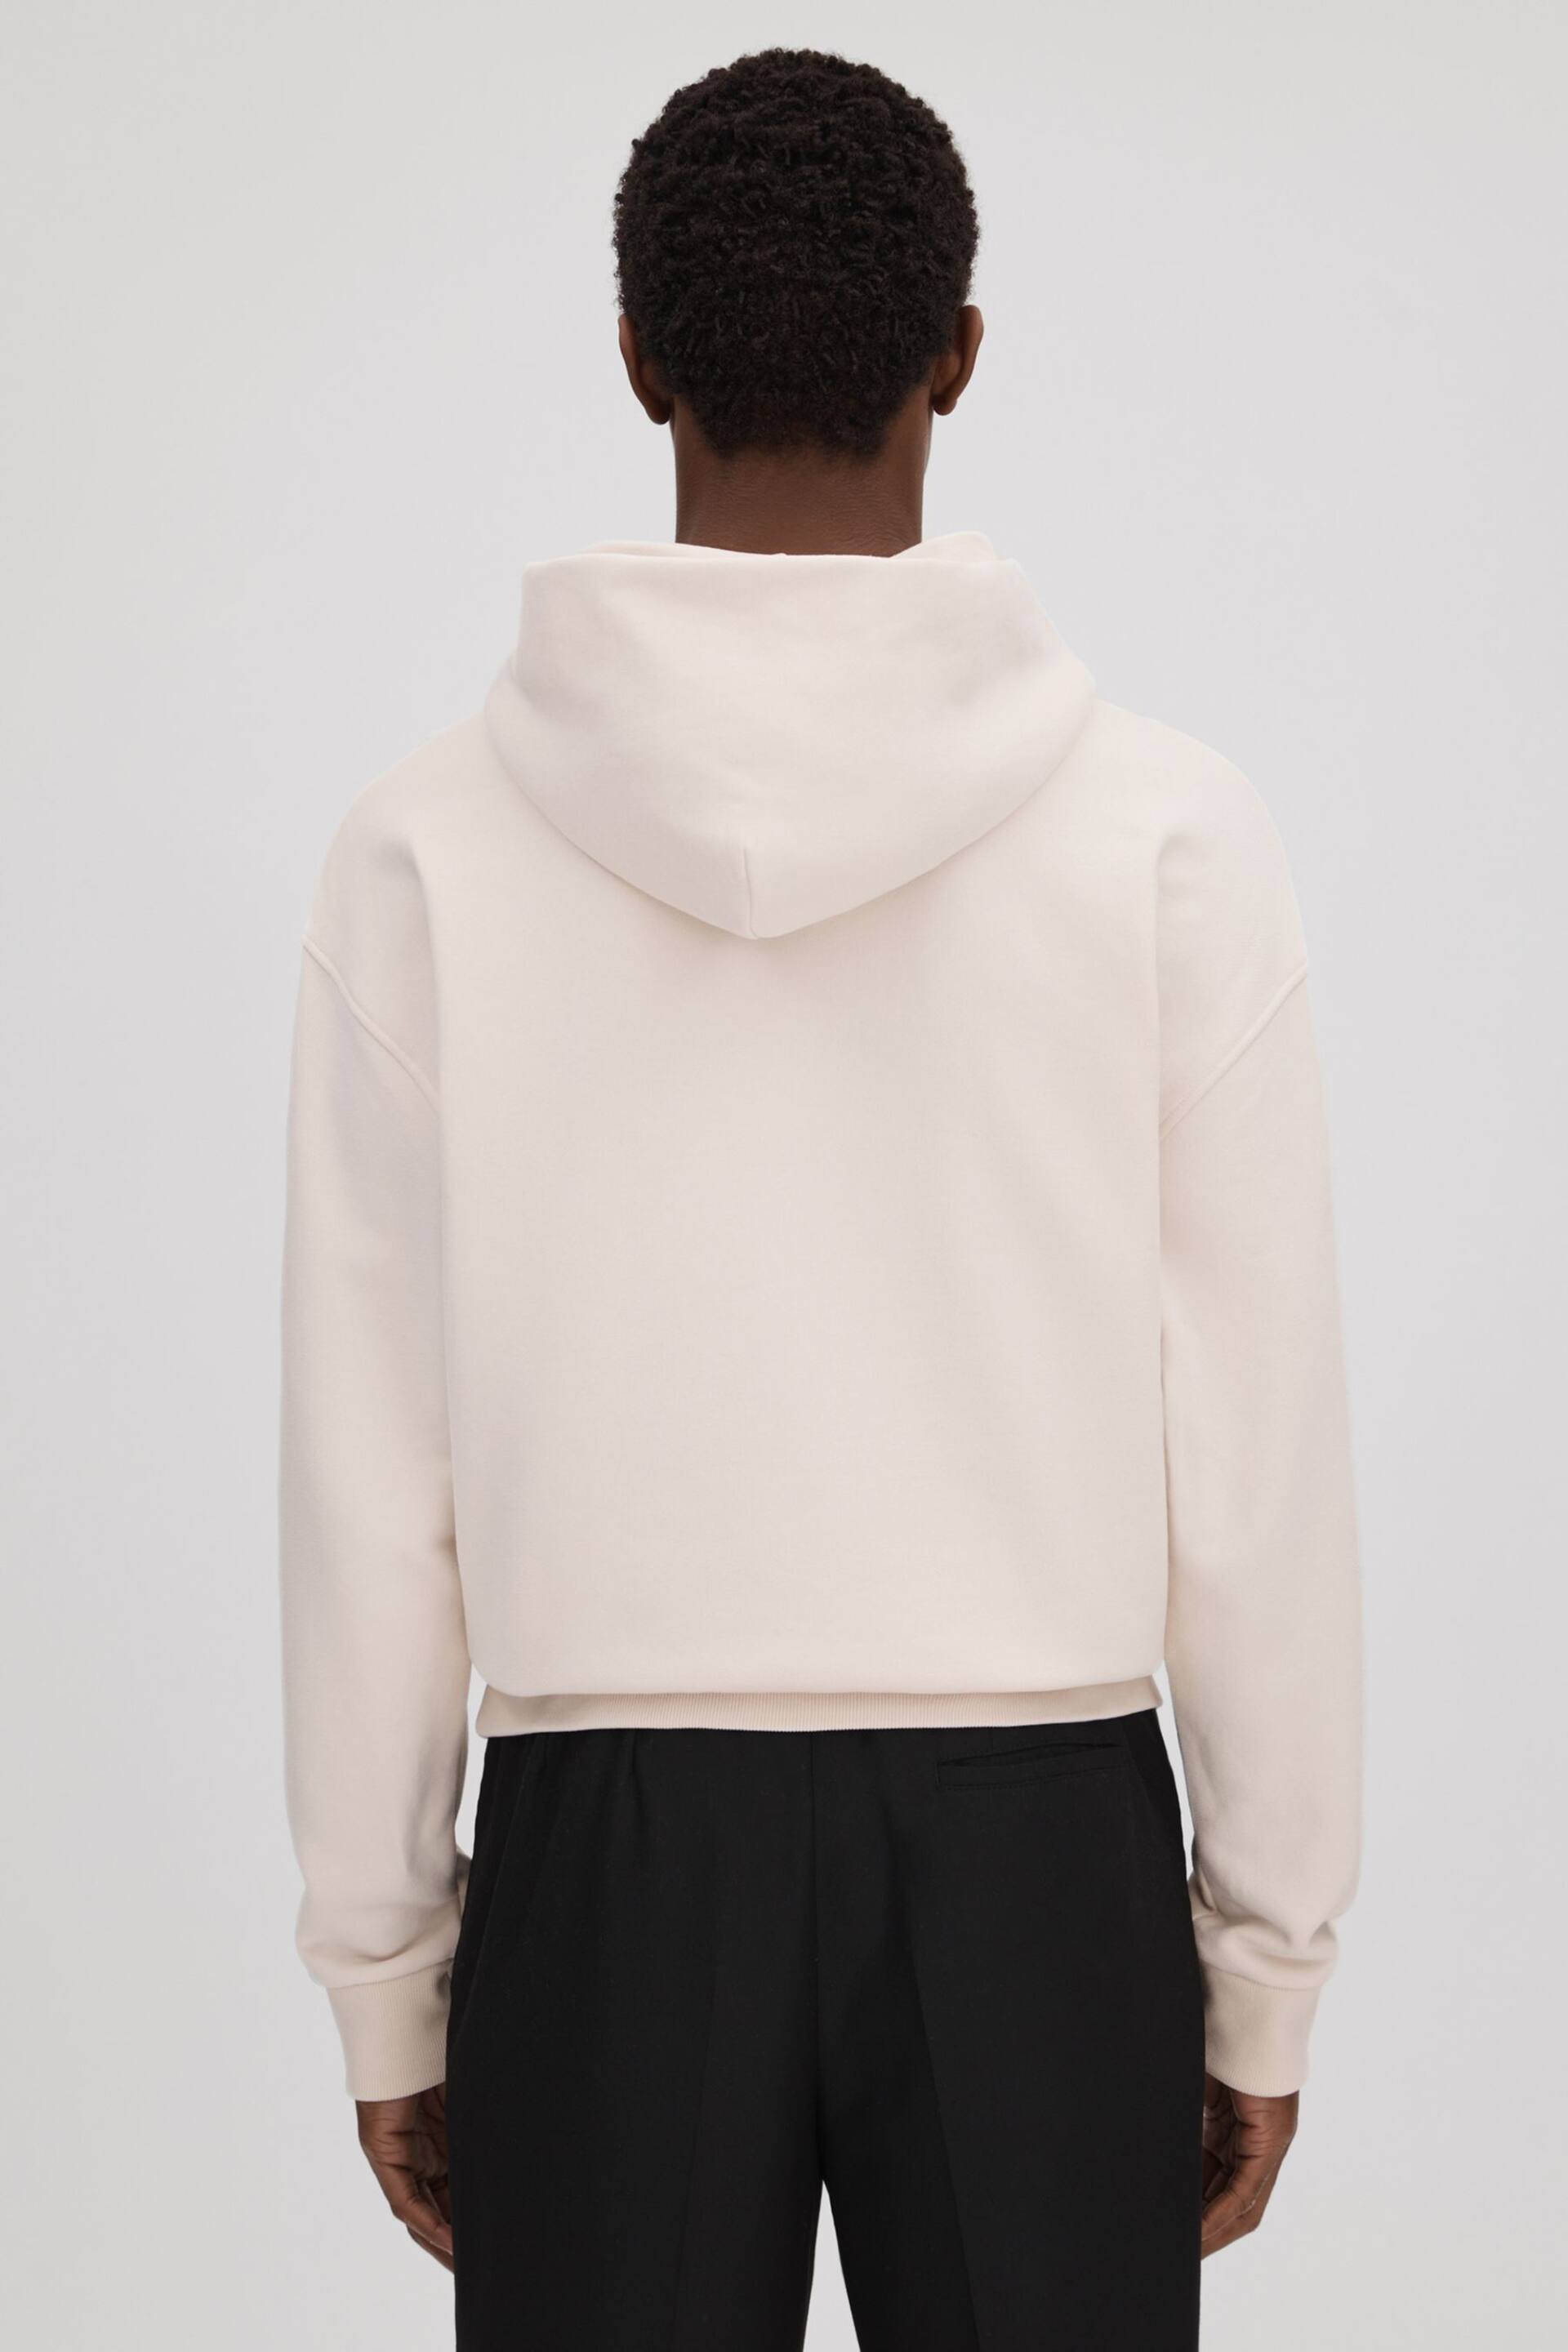 Reiss Off White Alexander Casual Fit Cotton Hoodie - Image 5 of 6